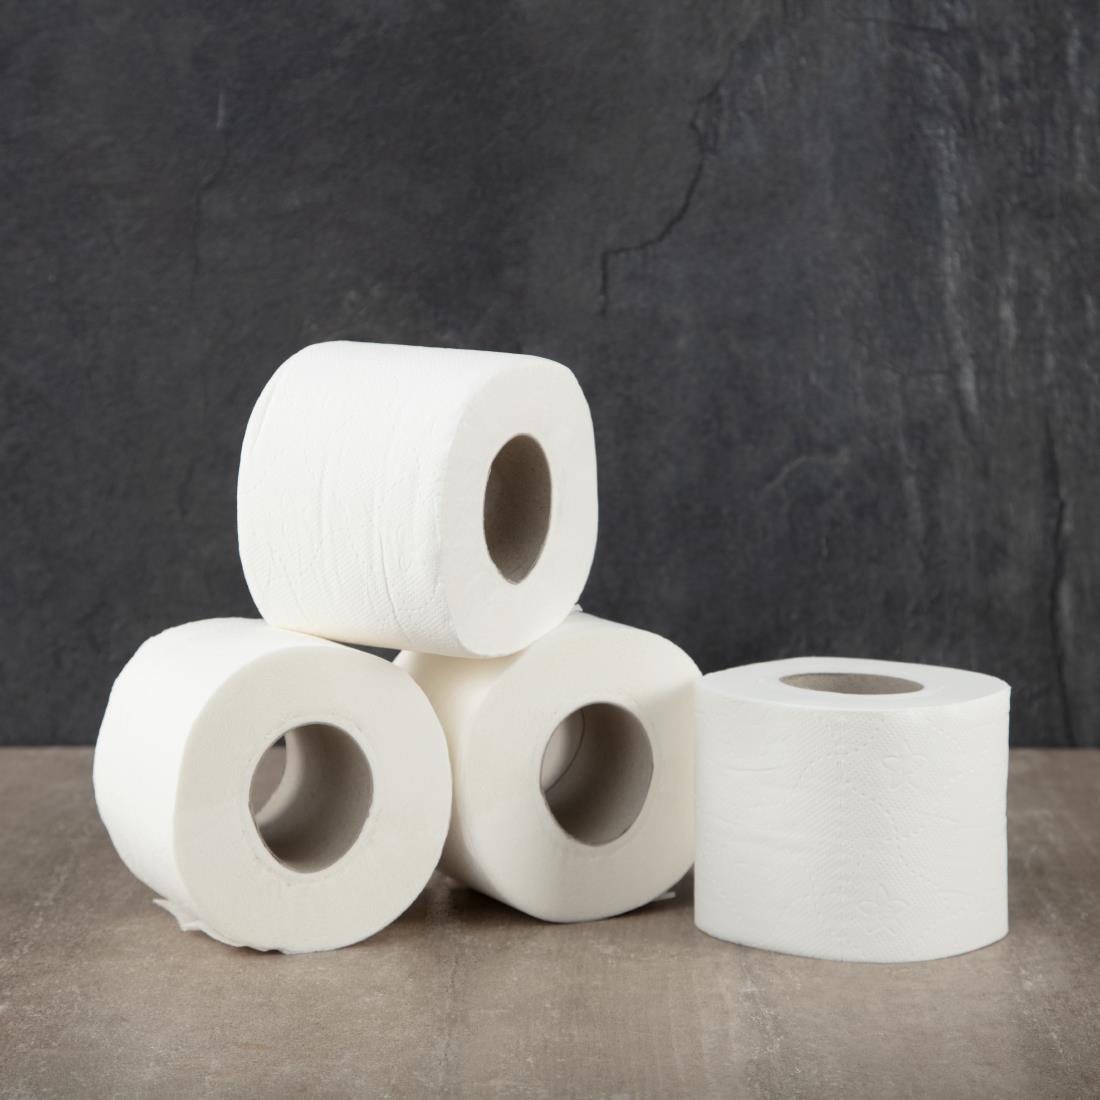 Jantex Toilet Rolls 2-ply (Pack of 36) - DL922  - 4